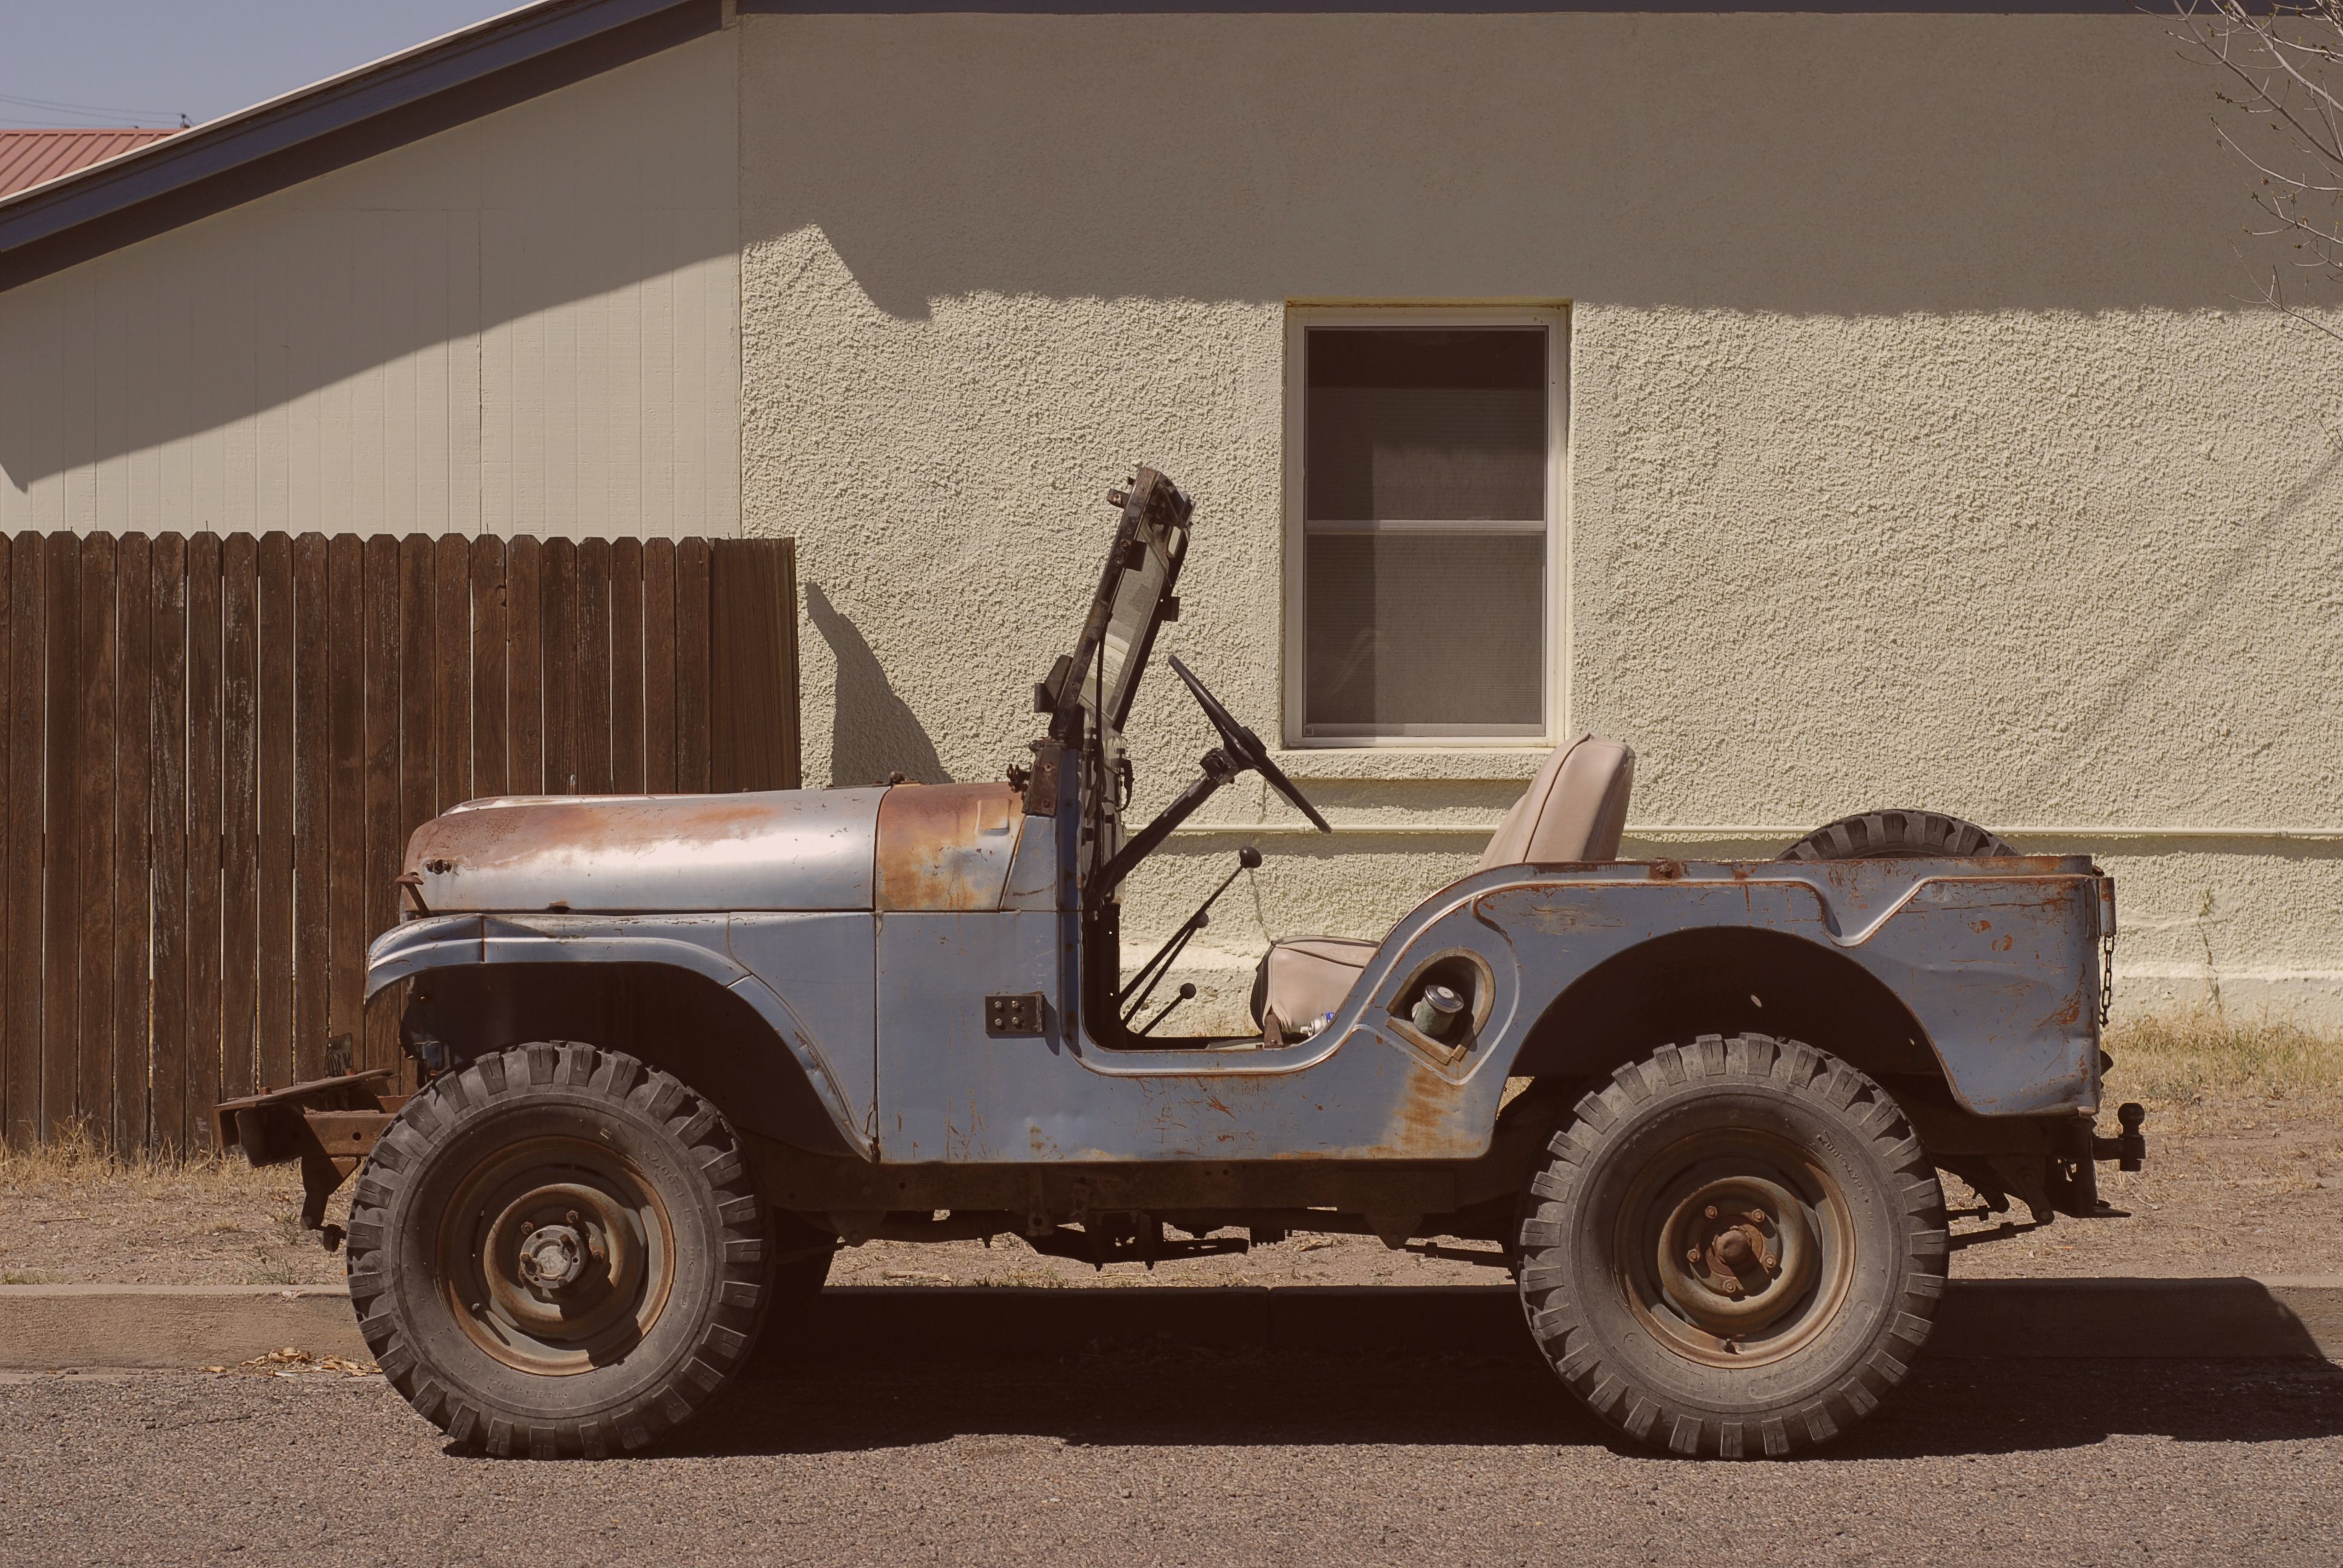 Old Jeep | Story Inspiration: Present | Pinterest | Jeeps and Story ...